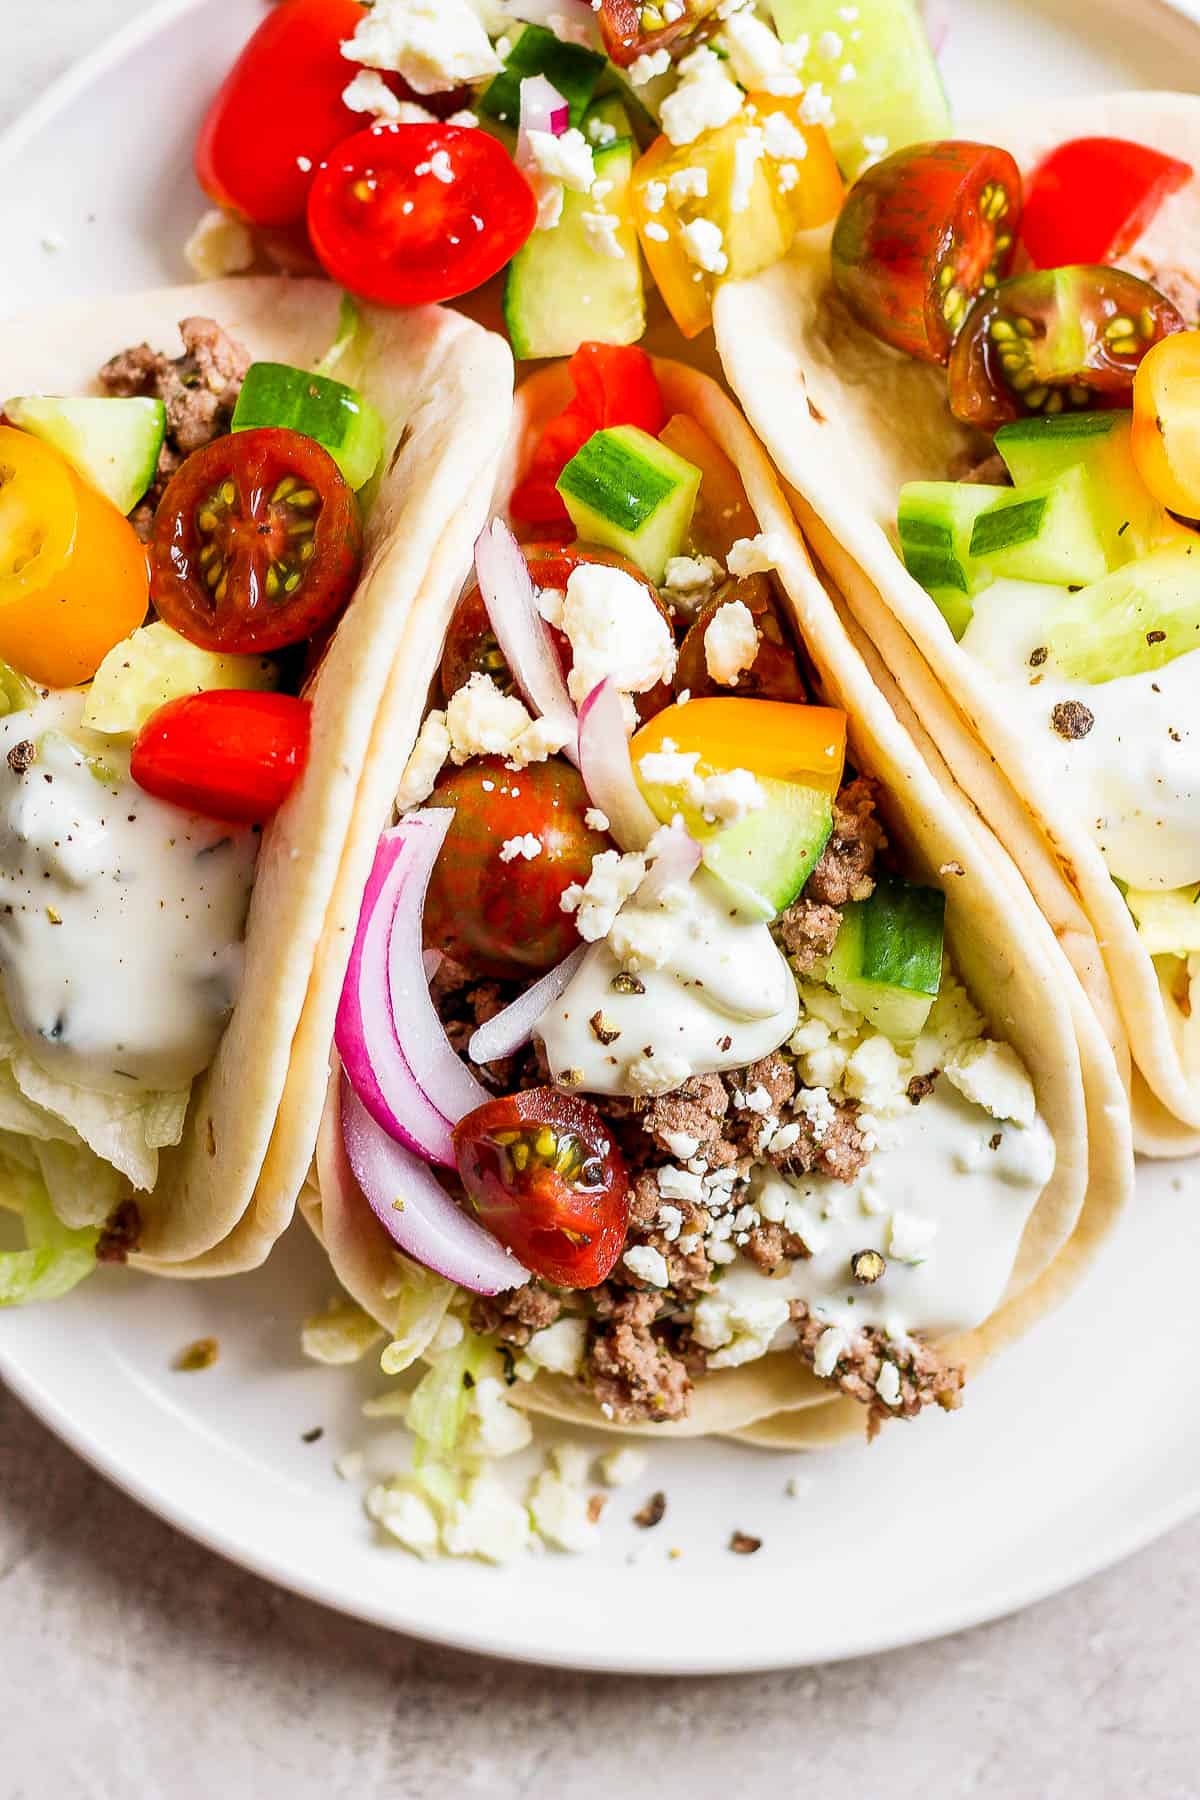 Three lamb tacos on a plate topped with red onion, cucumber, cherry tomatoes, feta, and tzatziki sauce.